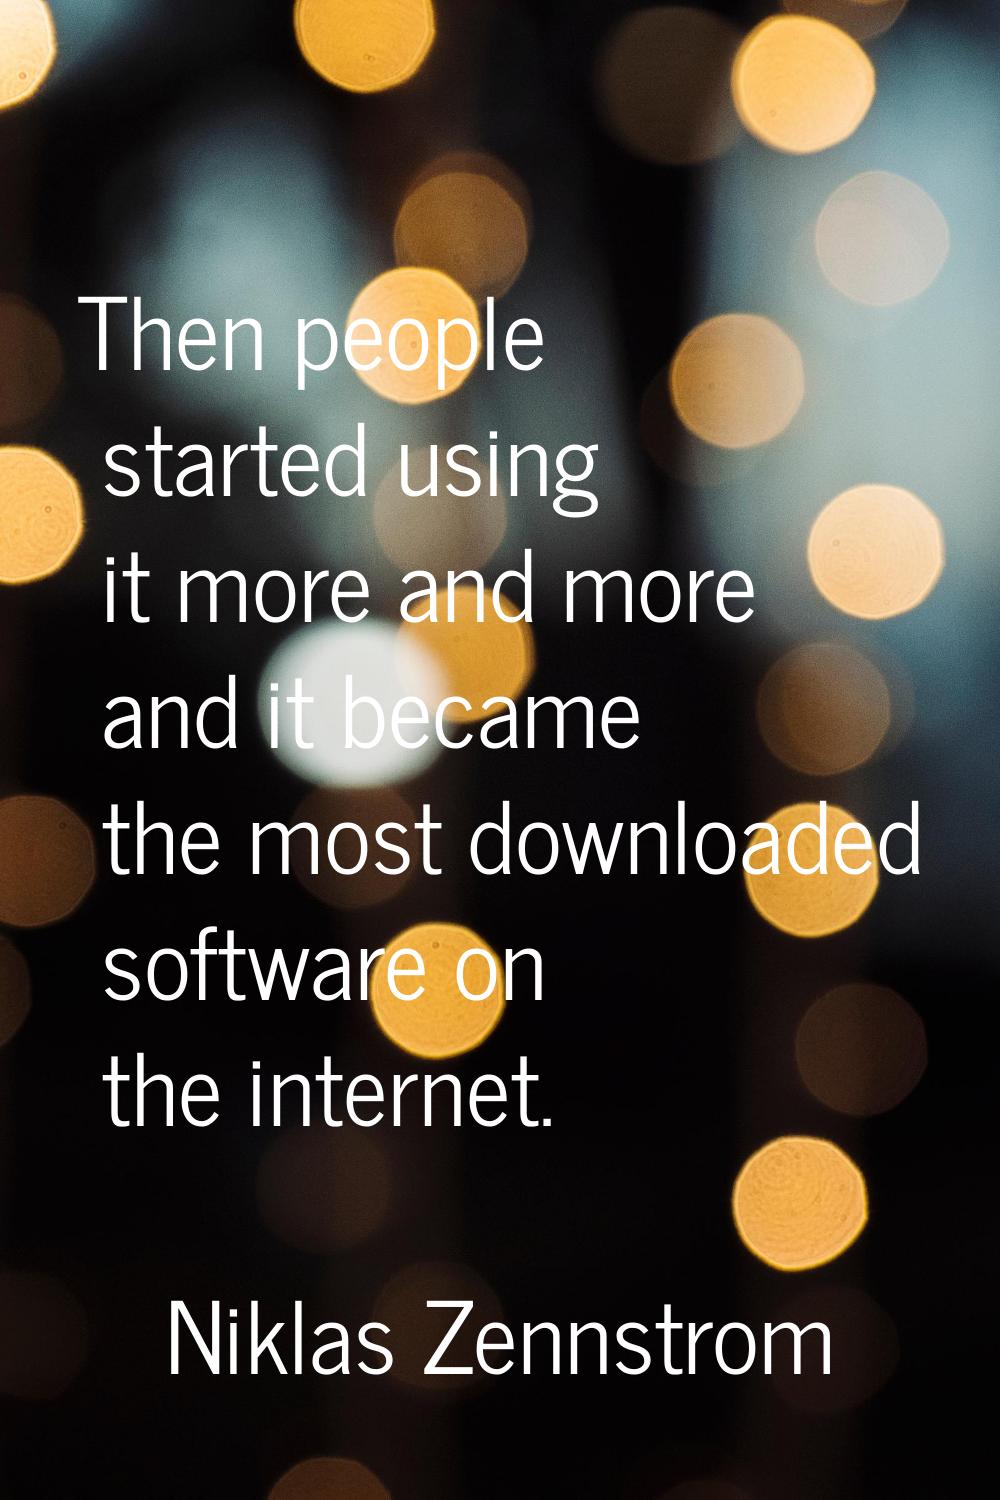 Then people started using it more and more and it became the most downloaded software on the intern